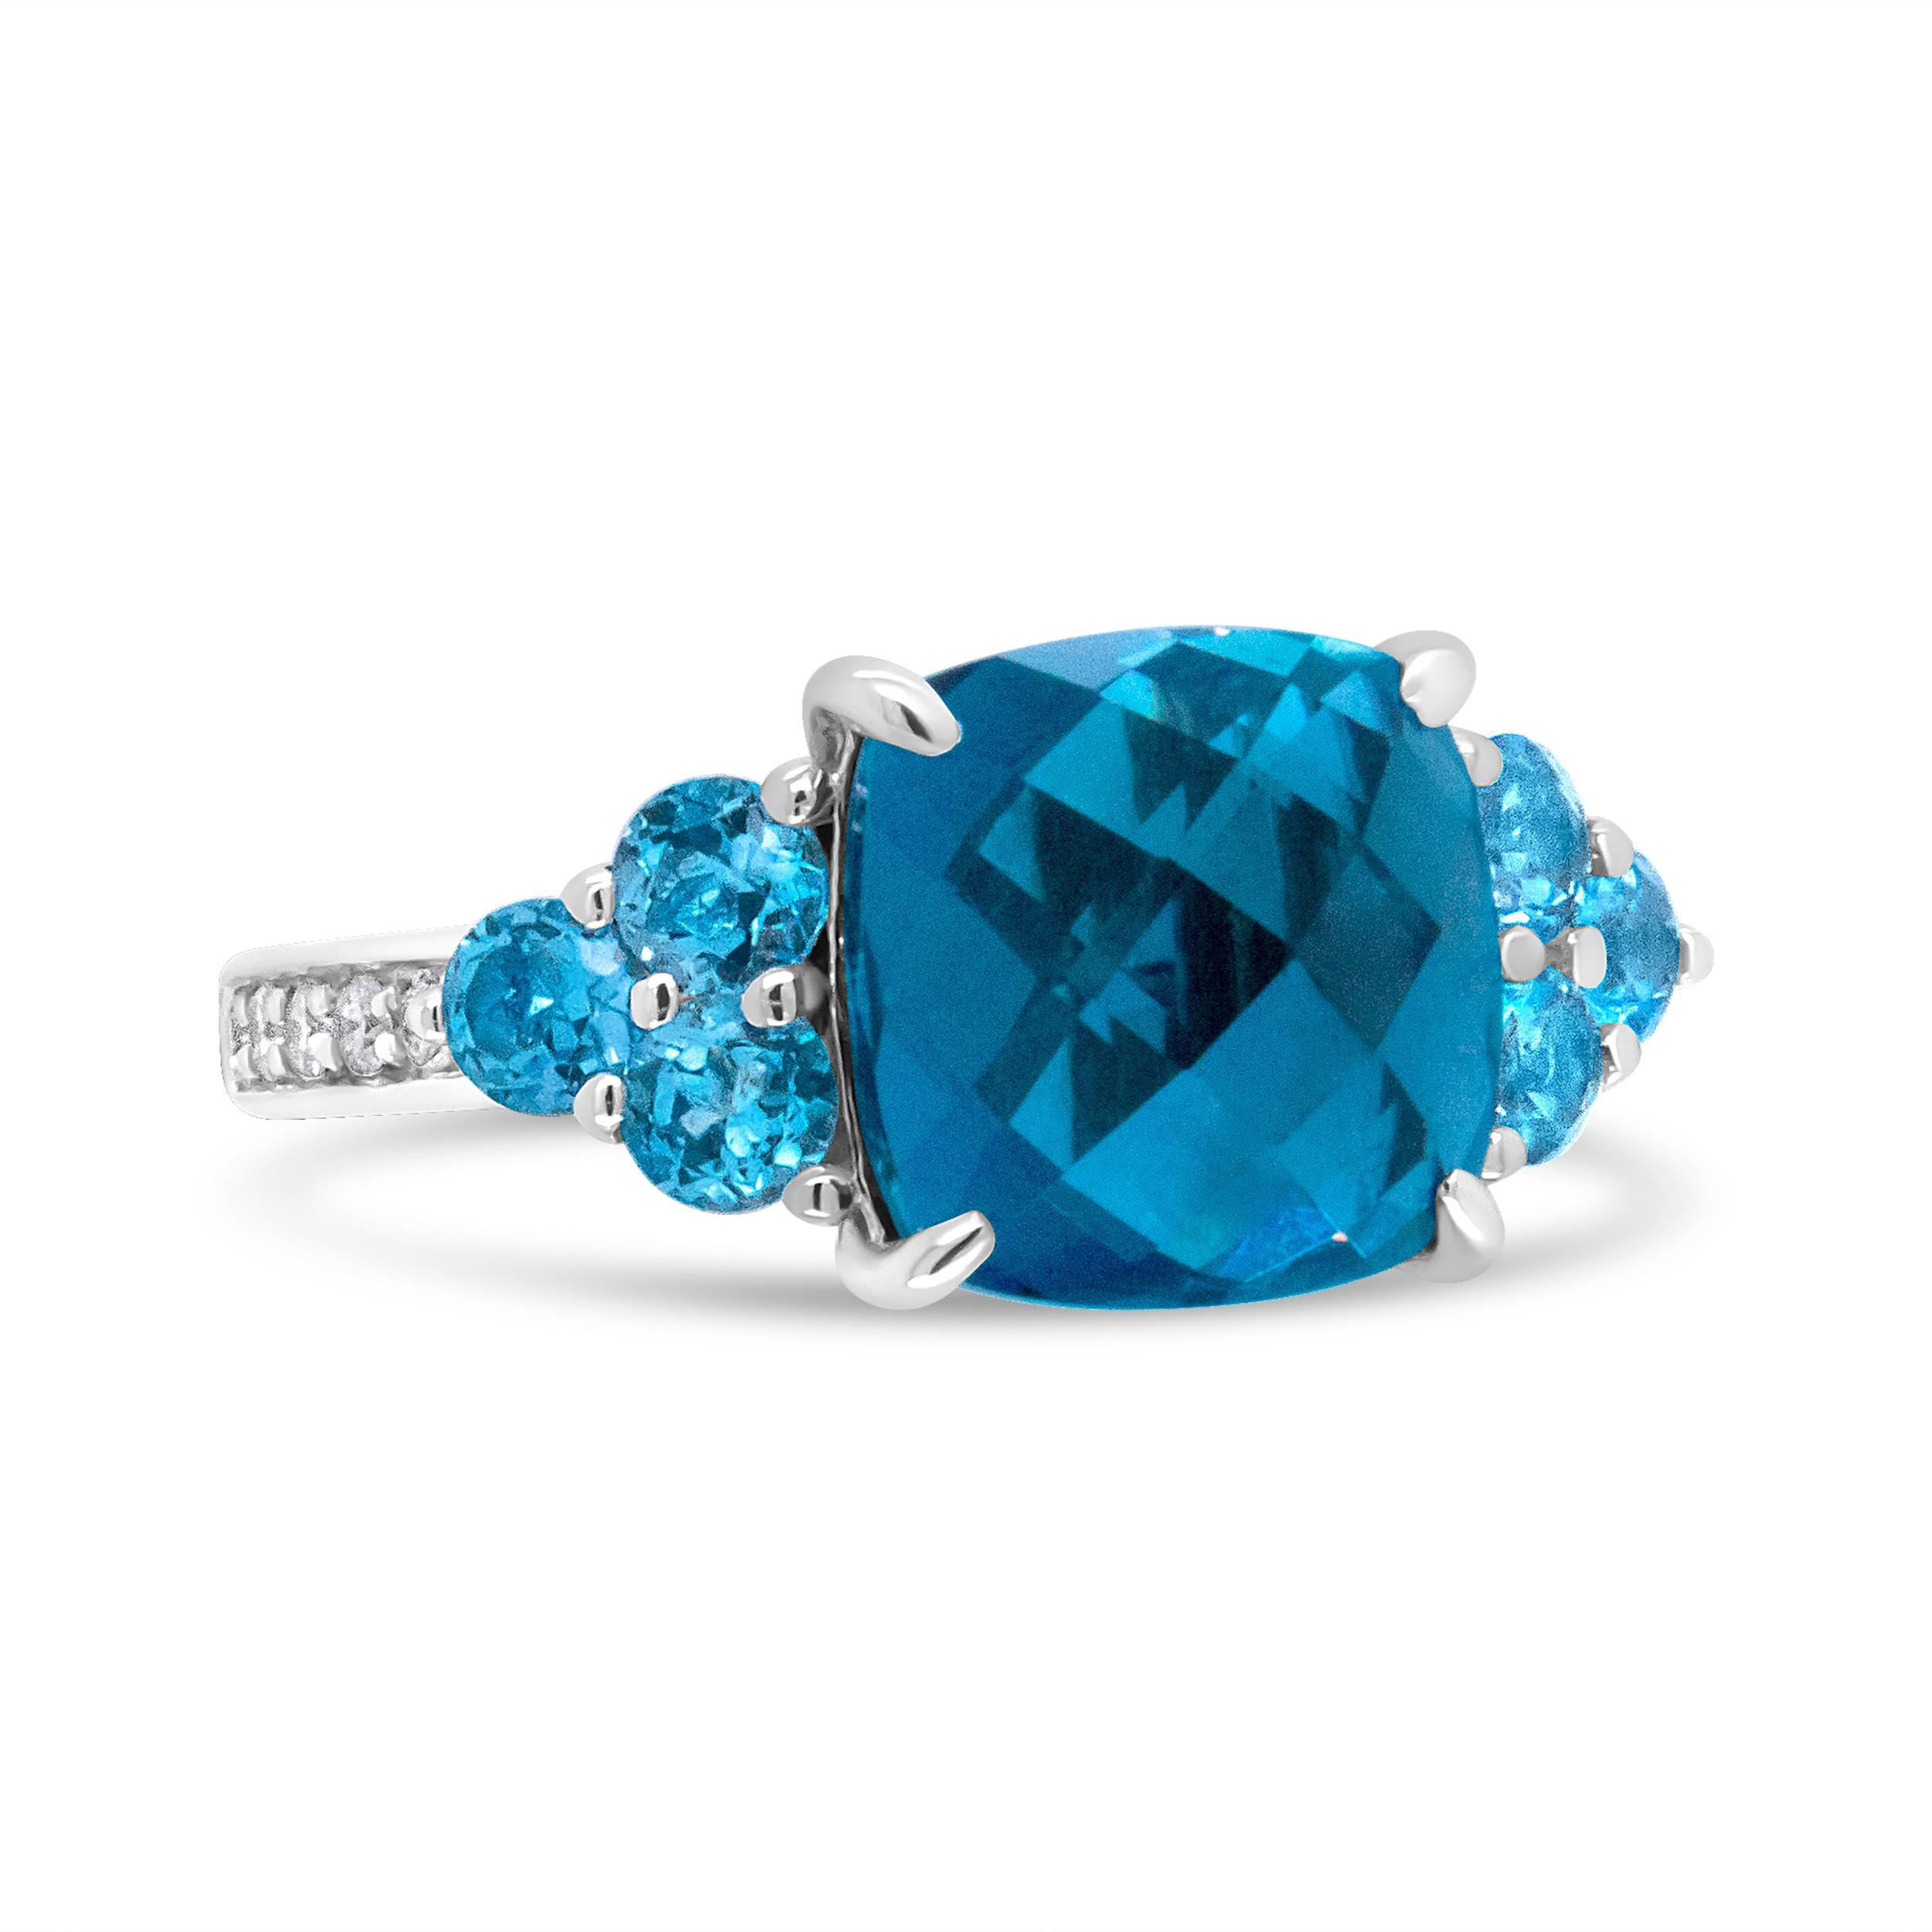 Blue is the new color of love. Wear love on your finger with this stunning blue topaz ring. A 10mm cushion shaped blue topaz gemstone sits as the central motif of this piece, flanked by 3 3.2 mm blue topaz gemstones on either side. The gemstones